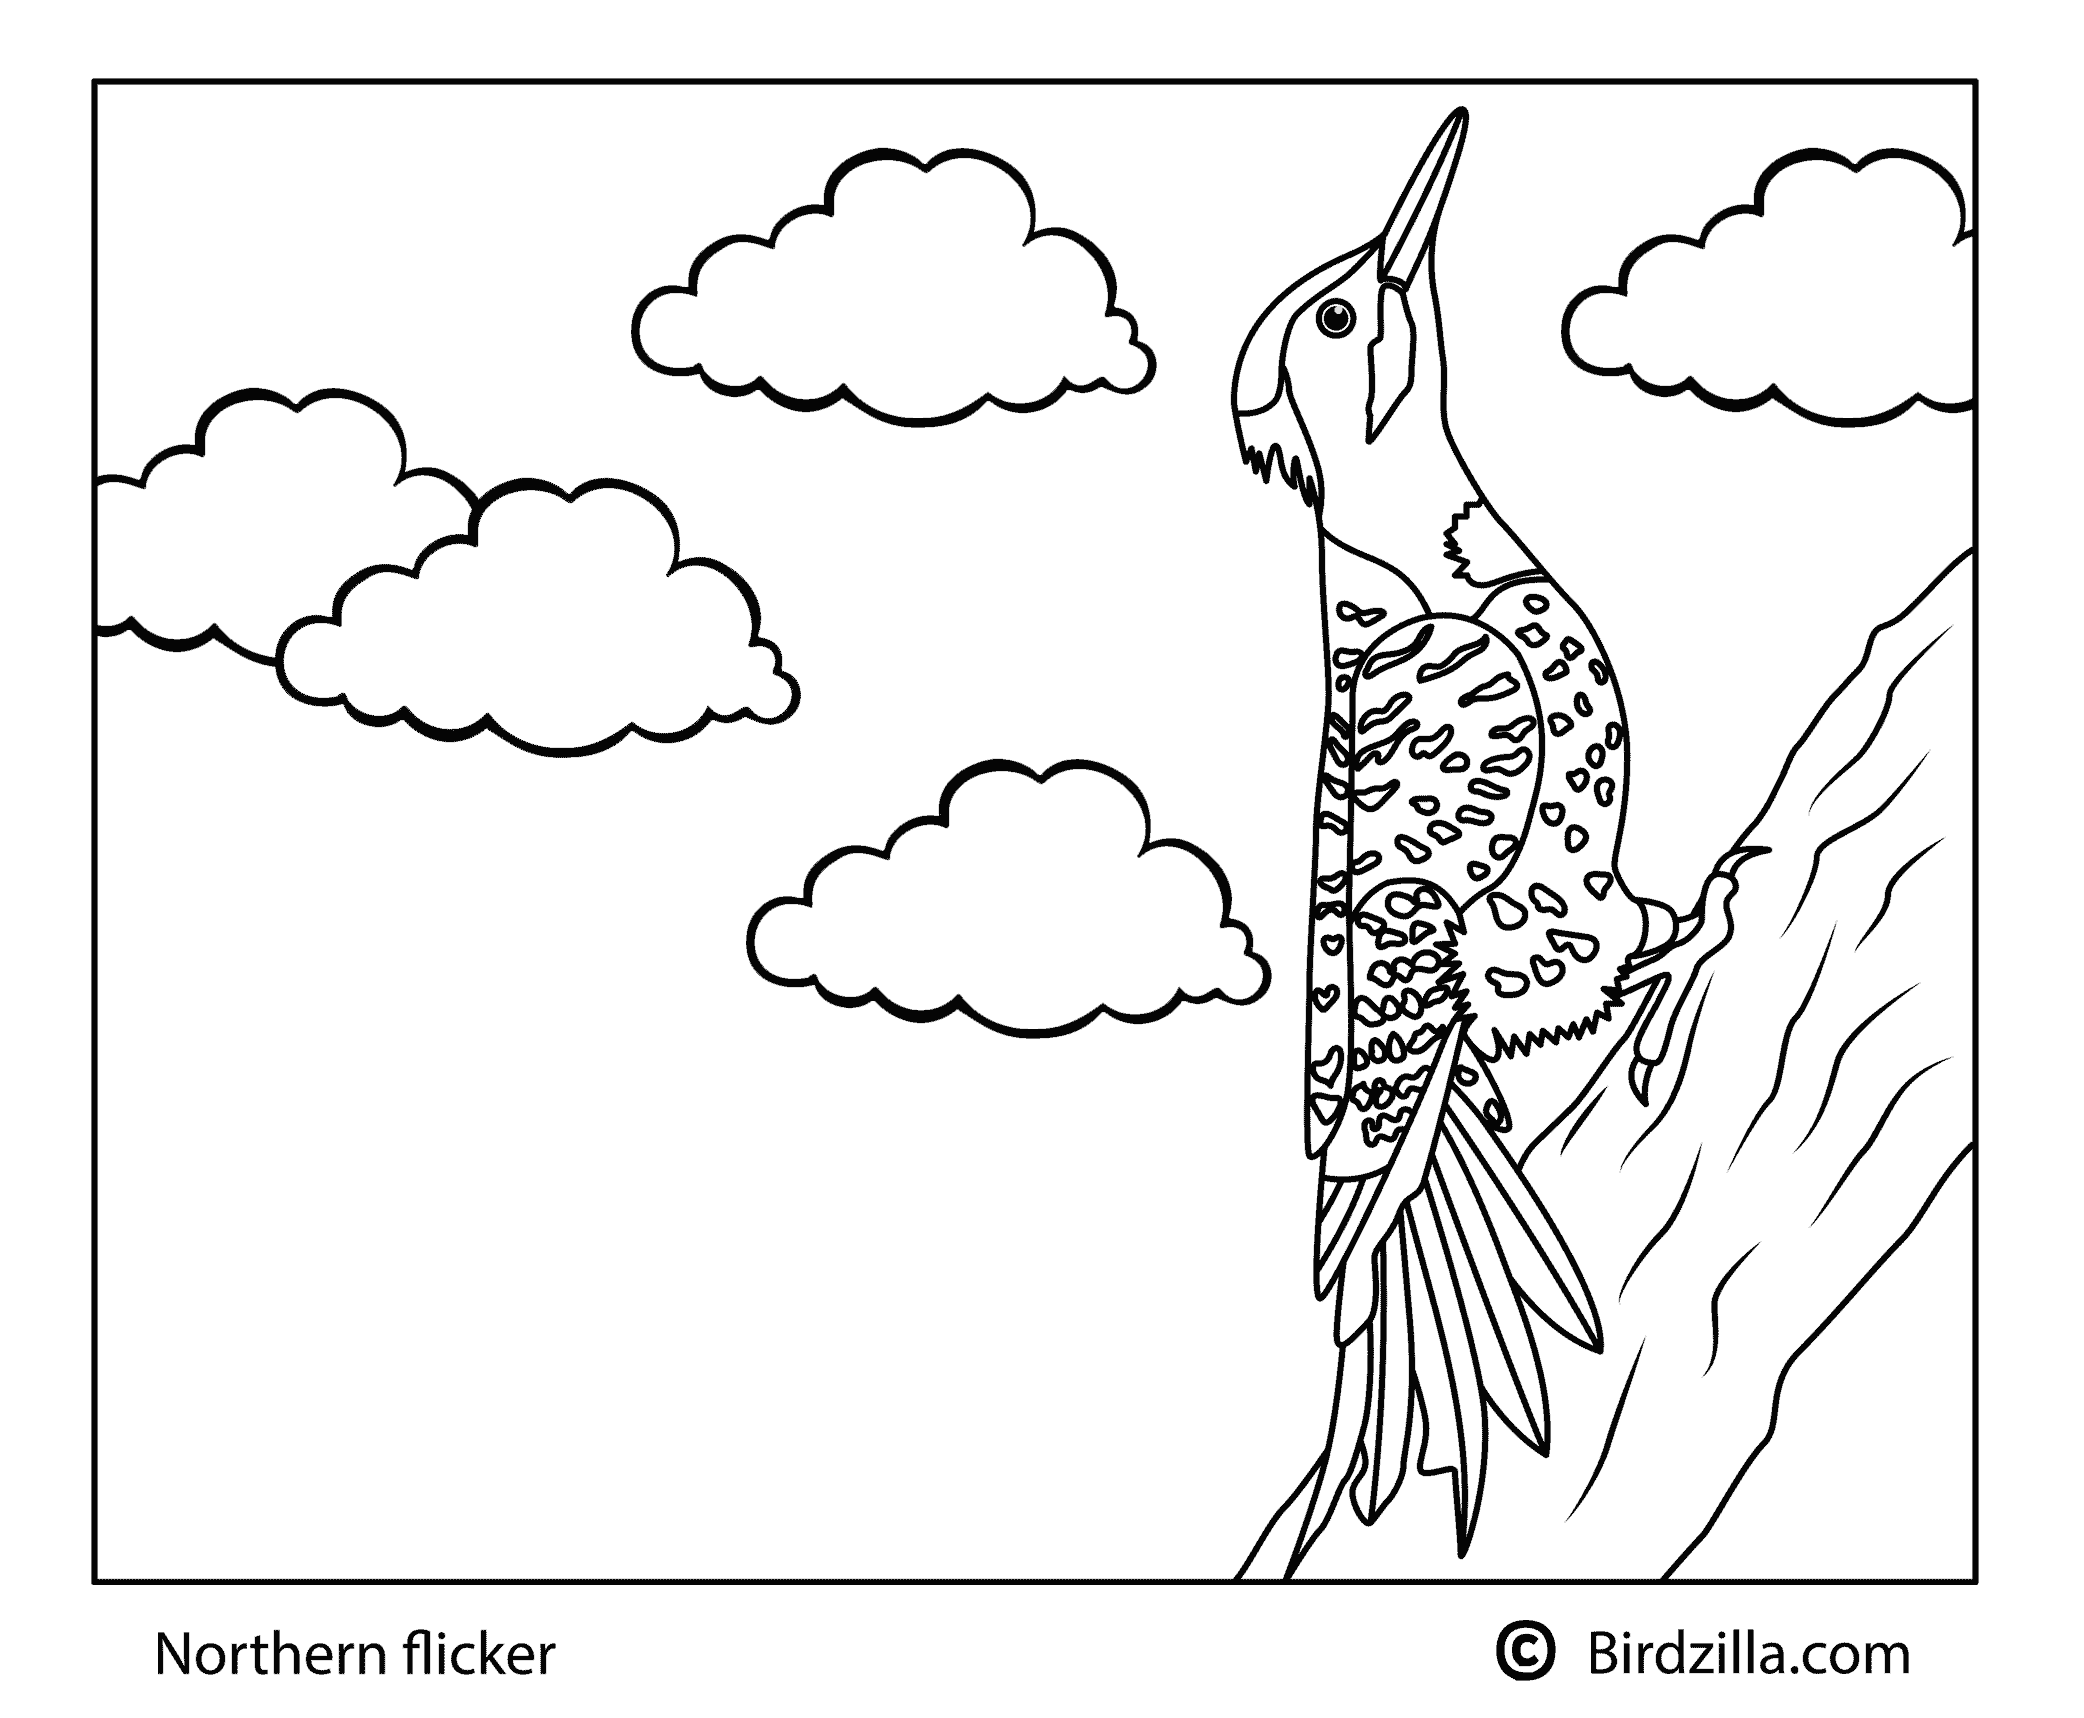 Northern Flicker coloring page